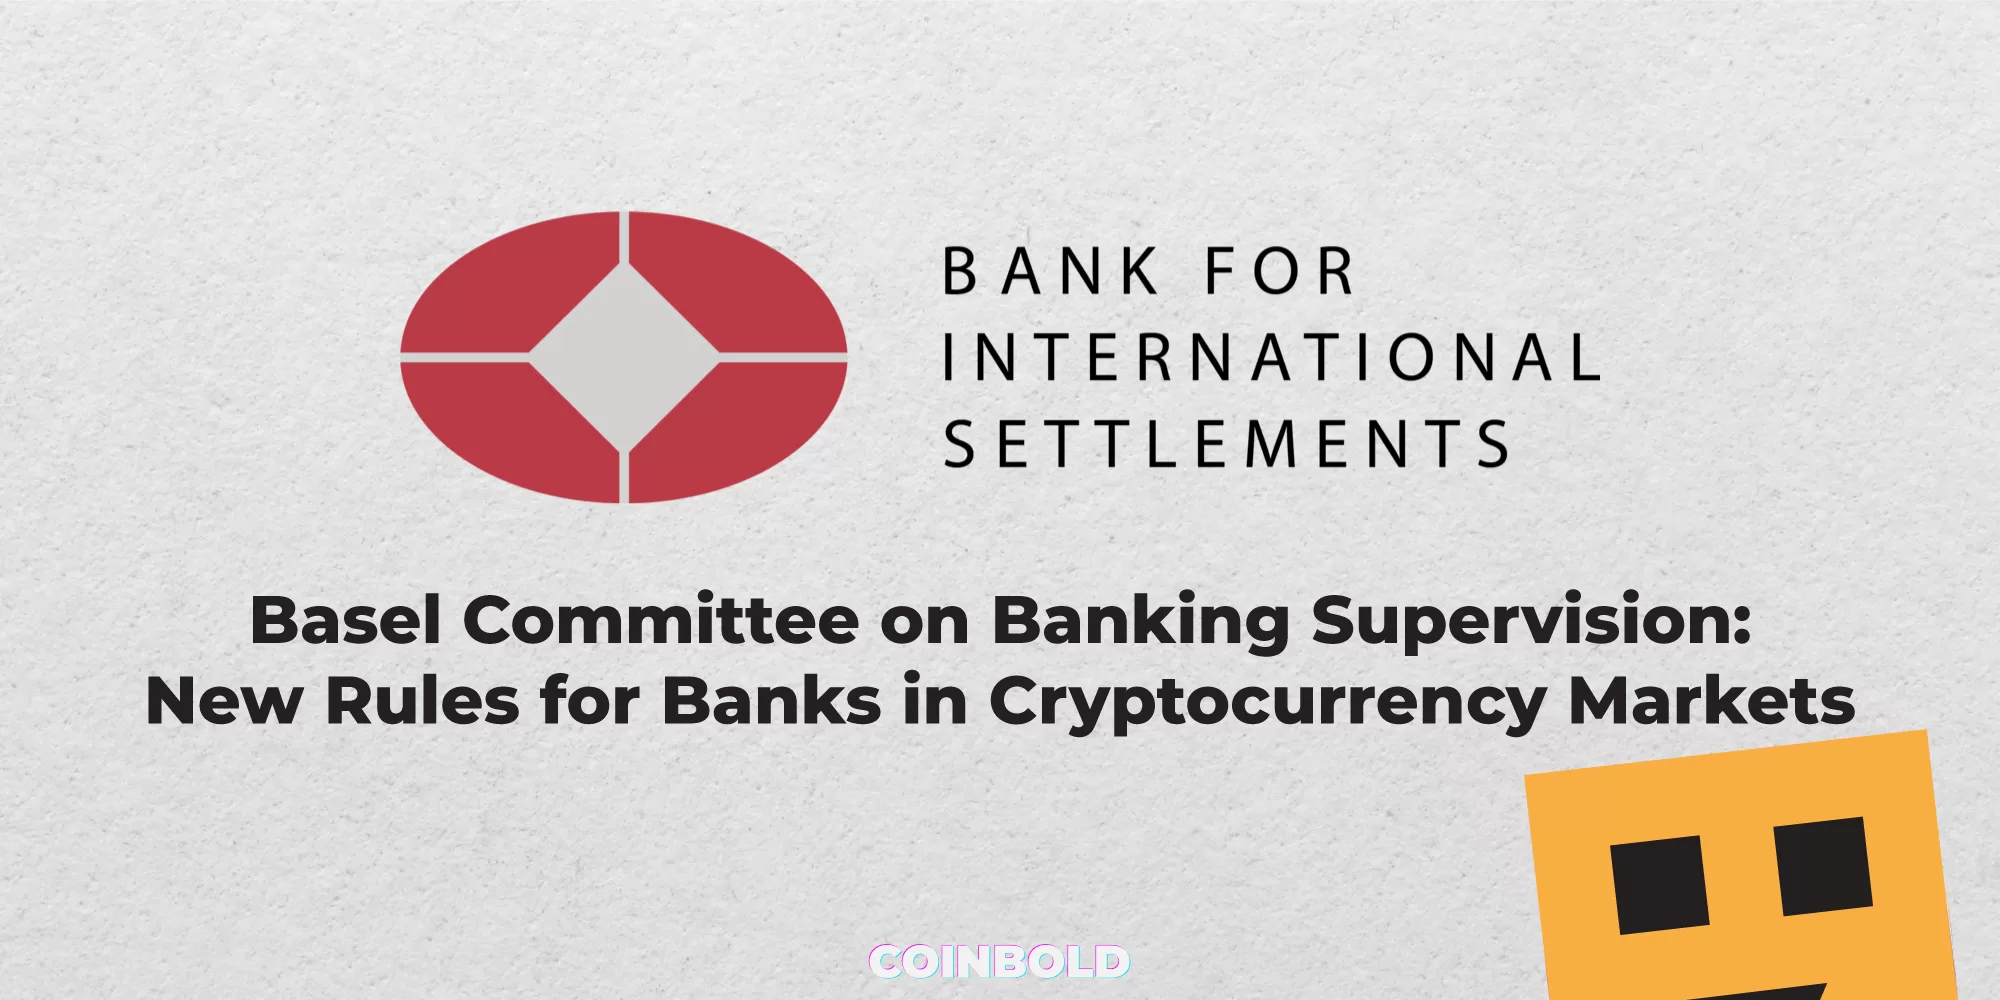 Basel Committee on Banking Supervision New Rules for Banks in Cryptocurrency Markets